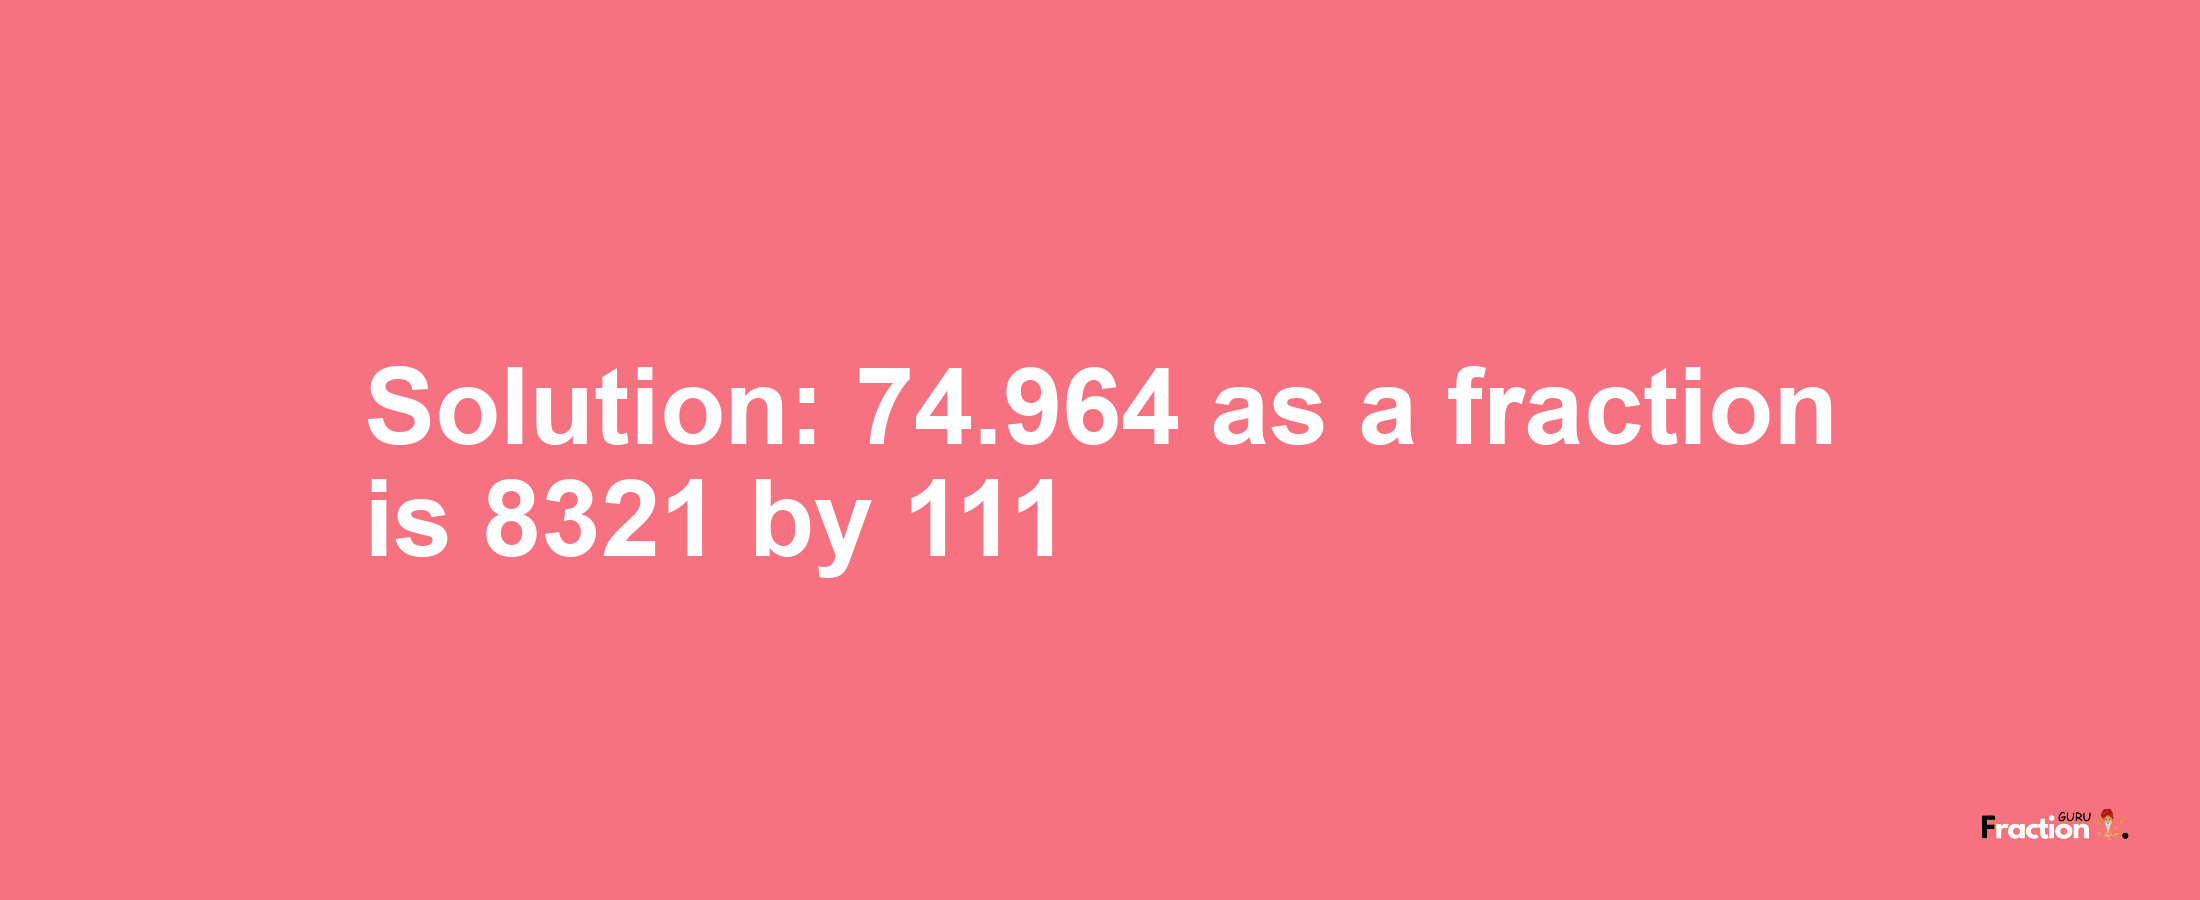 Solution:74.964 as a fraction is 8321/111